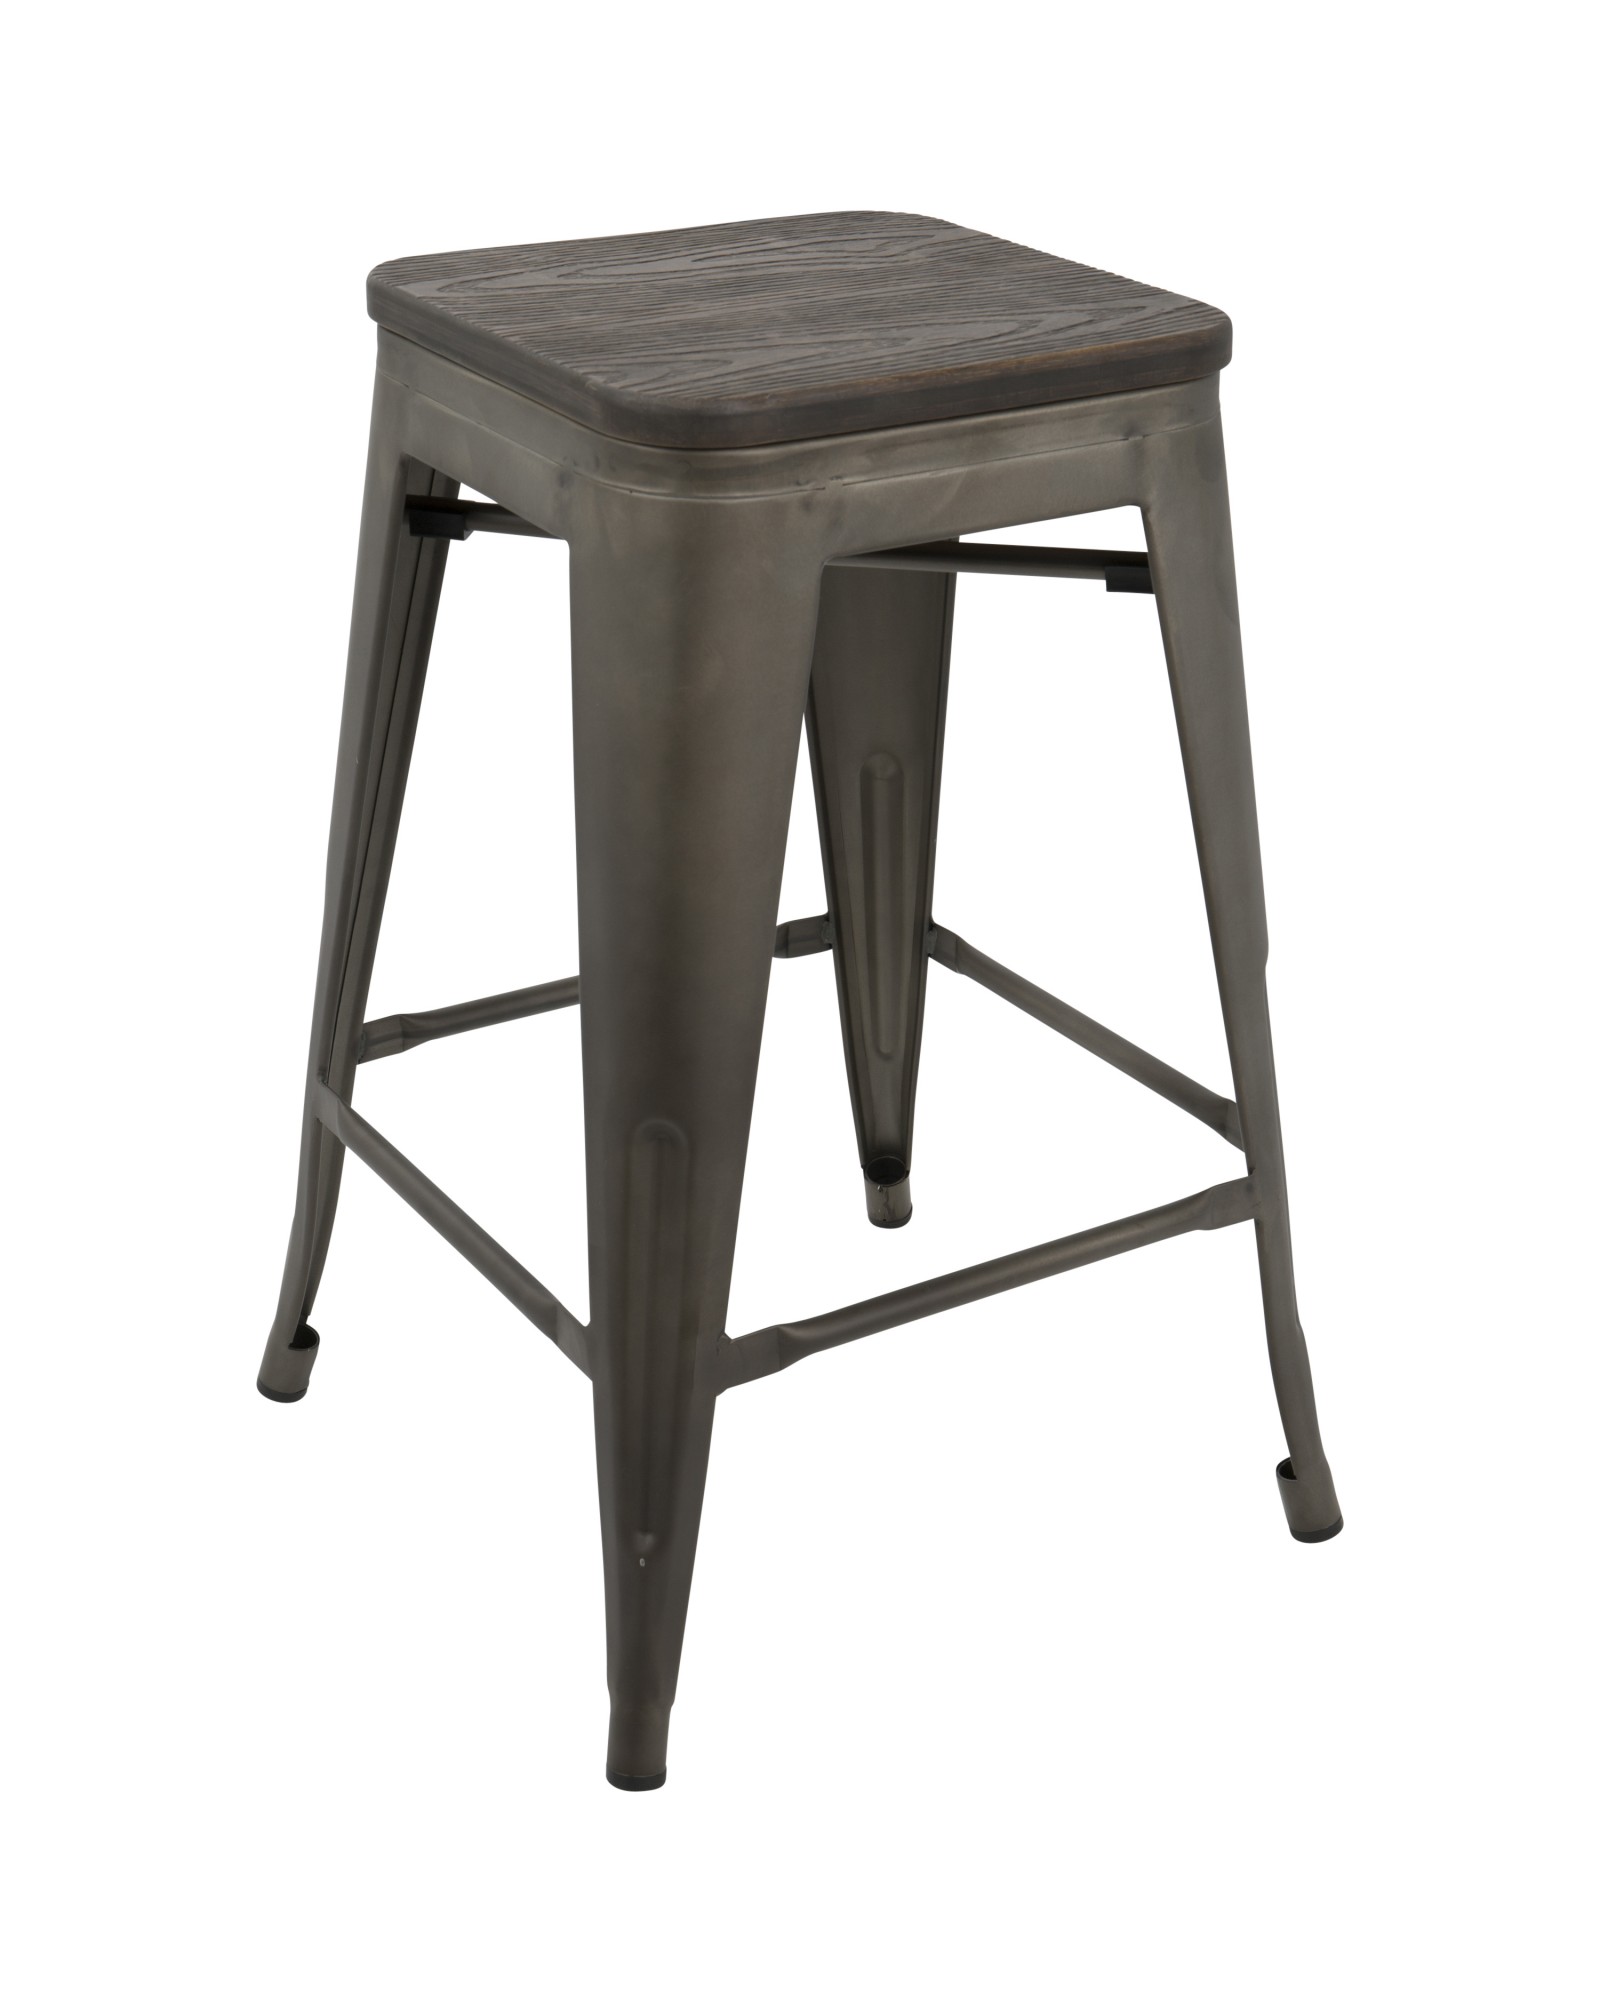 Oregon Industrial Stackable Counter Stool in Antique and Espresso - Set of 2